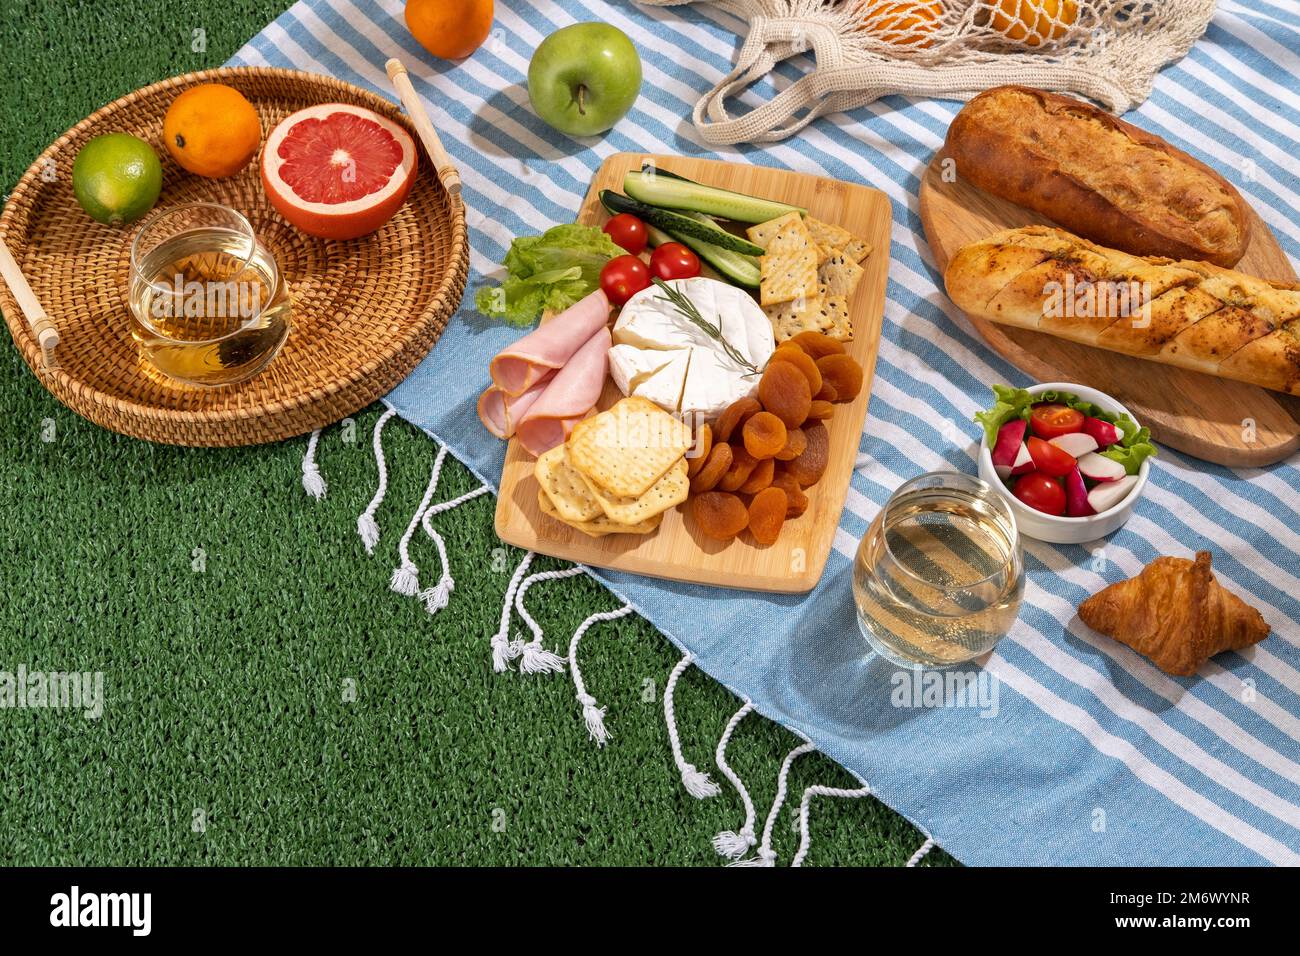 https://c8.alamy.com/comp/2M6WYNR/picnic-blanket-with-charcuterie-boards-healthy-food-and-wine-in-park-on-the-grass-on-sunny-day-2M6WYNR.jpg